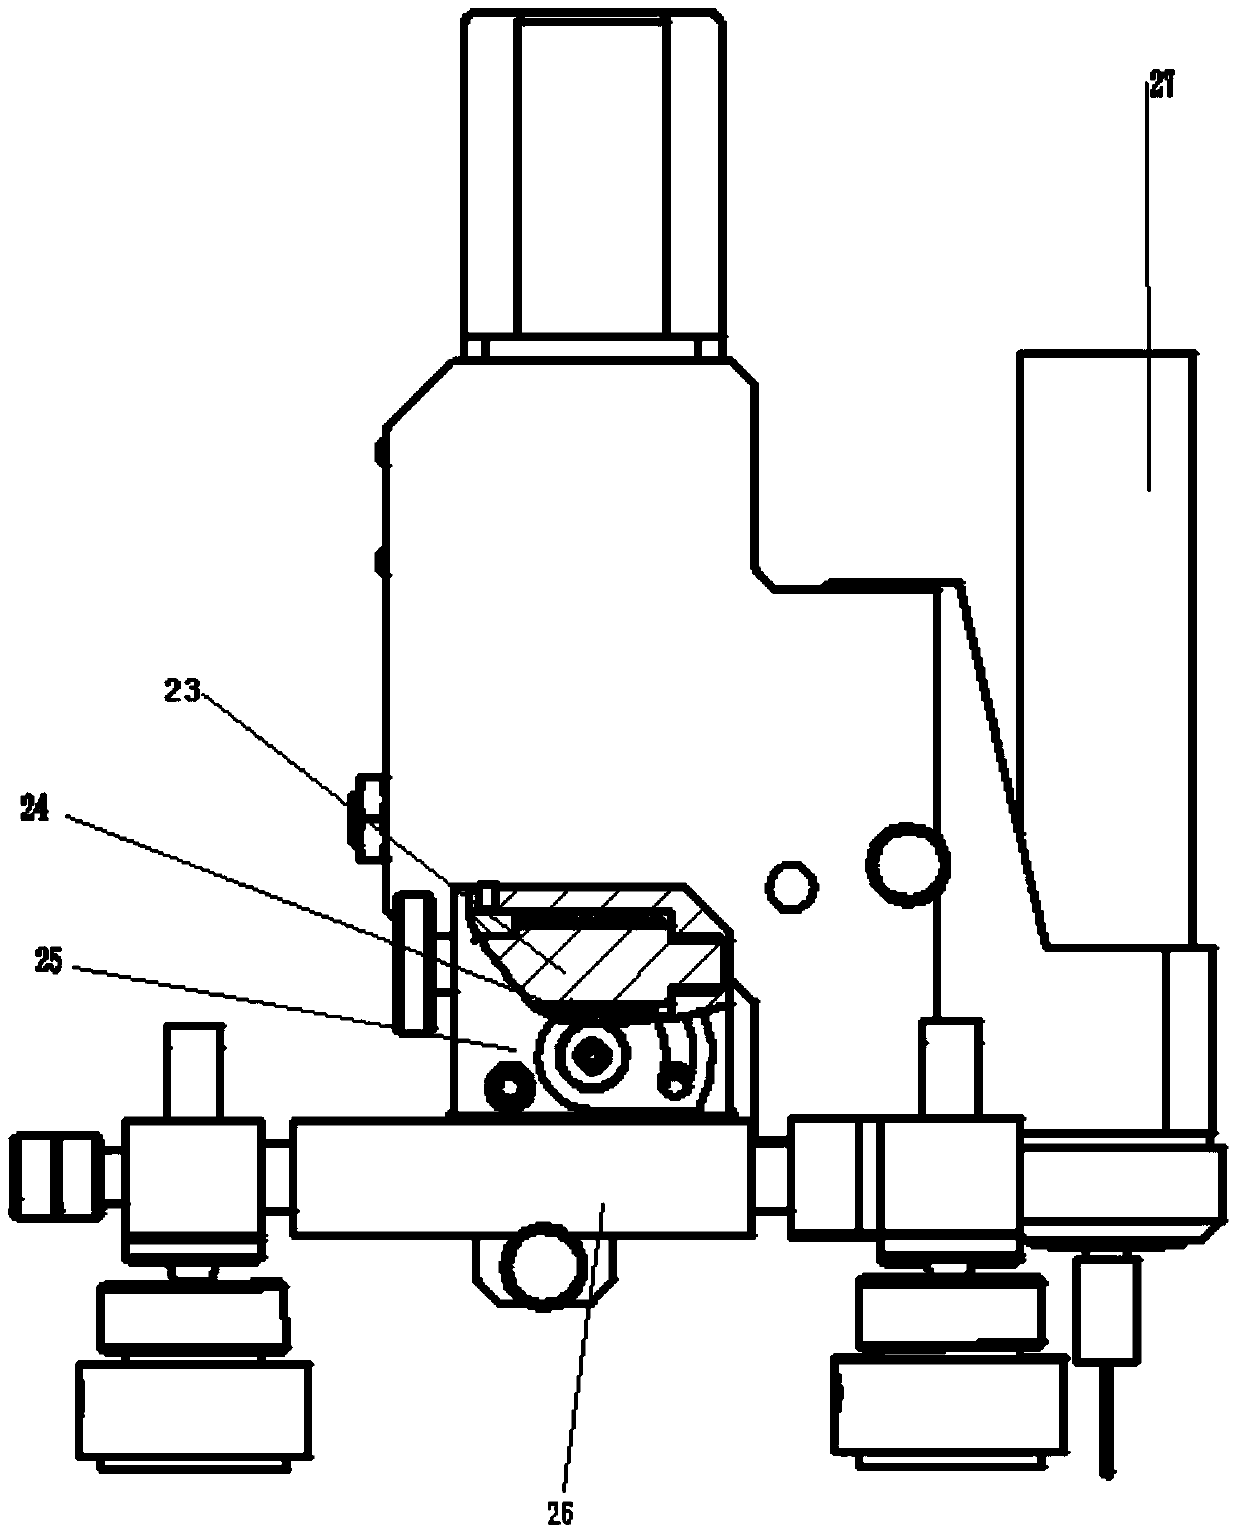 A horizontally stable automatic stress measurement drilling machine and its working method